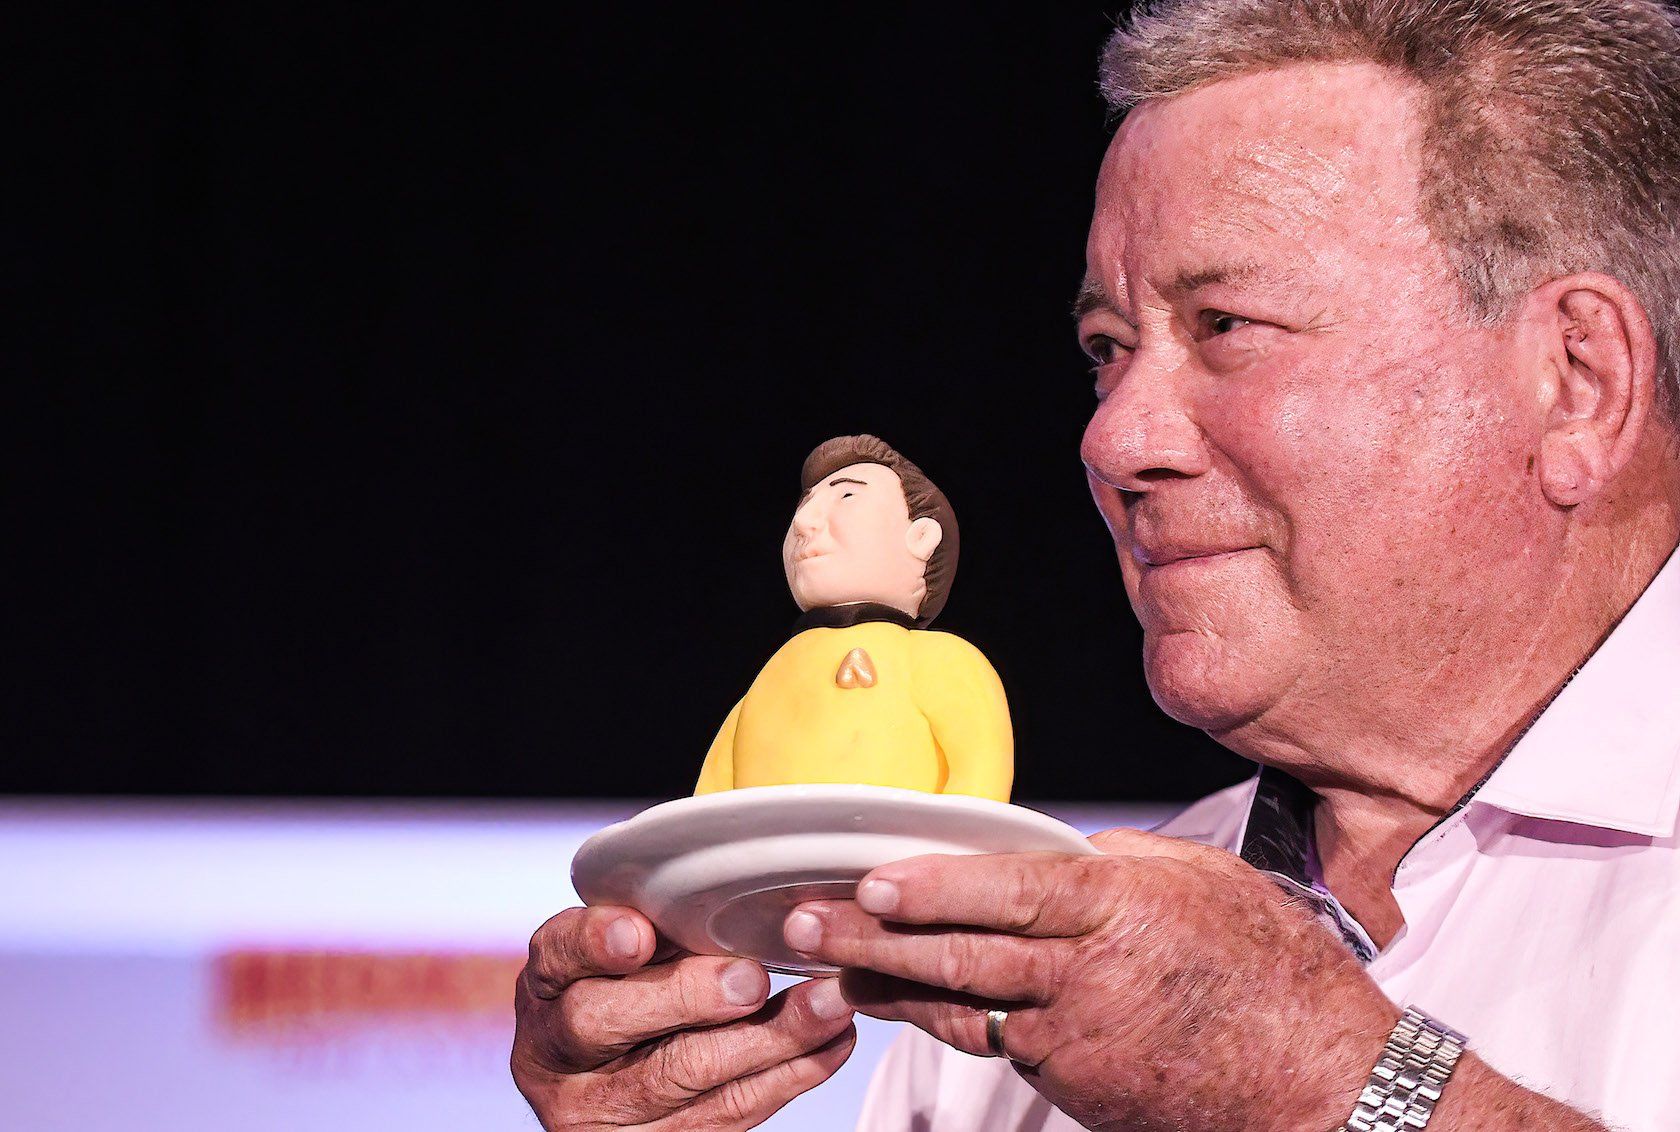 William Shatner from 'Star Trek' holds a piece of Captain Kirk birthday cake. William Shatner's age is 90 in 2021